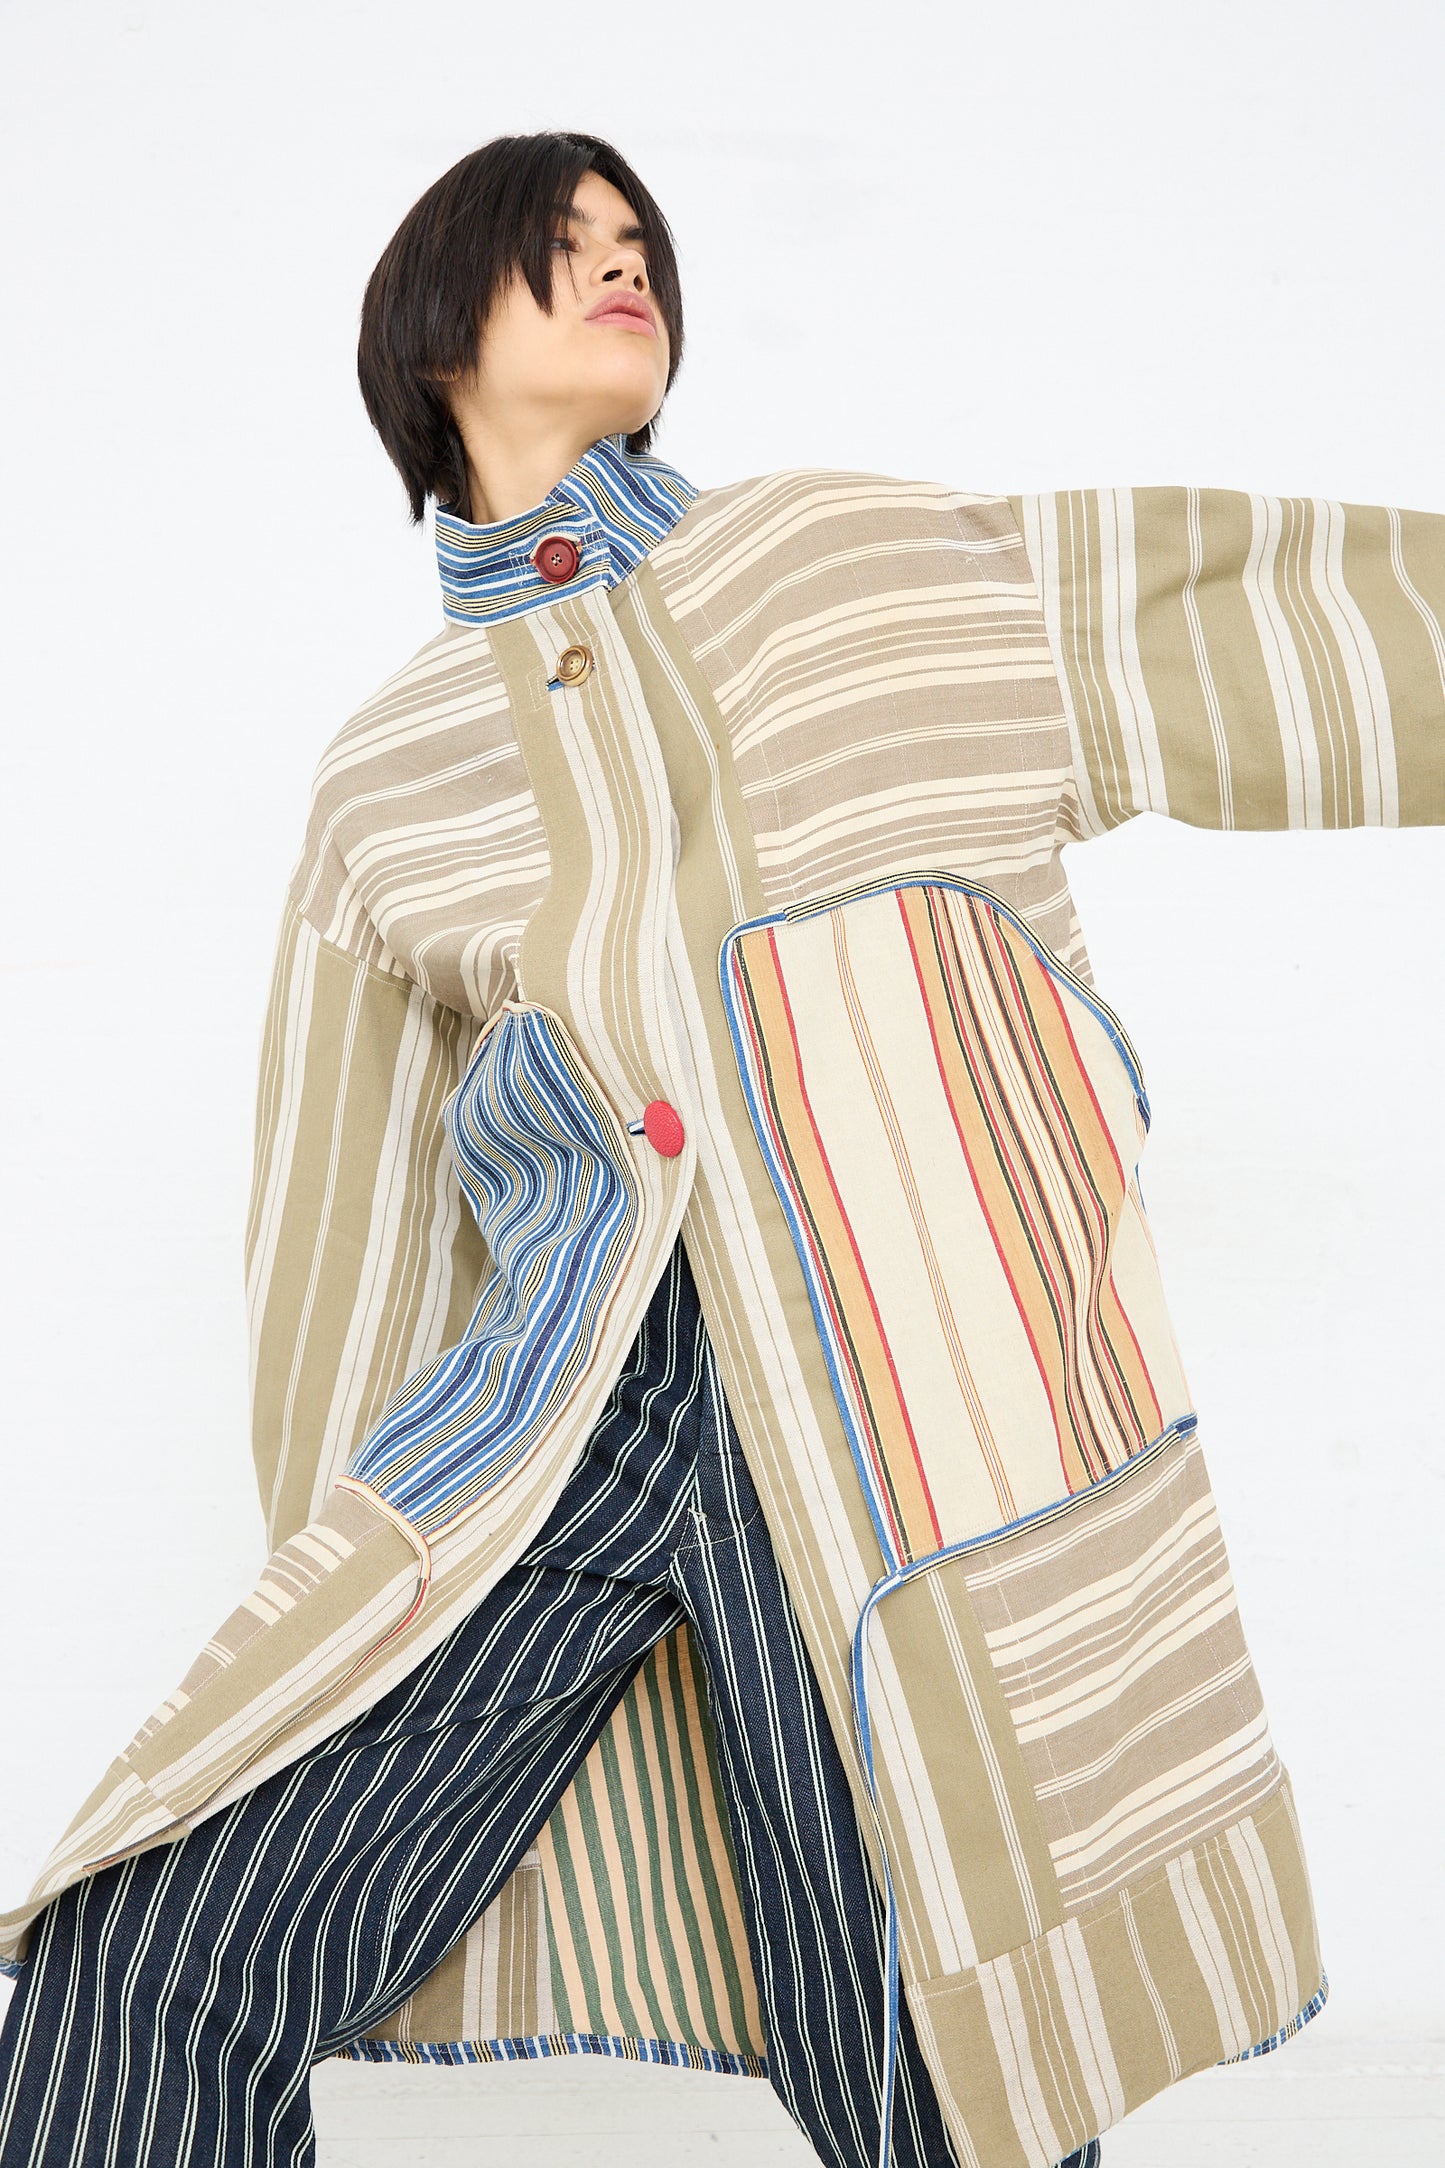 A person wearing a Thank You Have A Good Day Patchwork French Ticking Fishtail Parka with an oversized silhouette is standing in a dynamic pose against a white background.